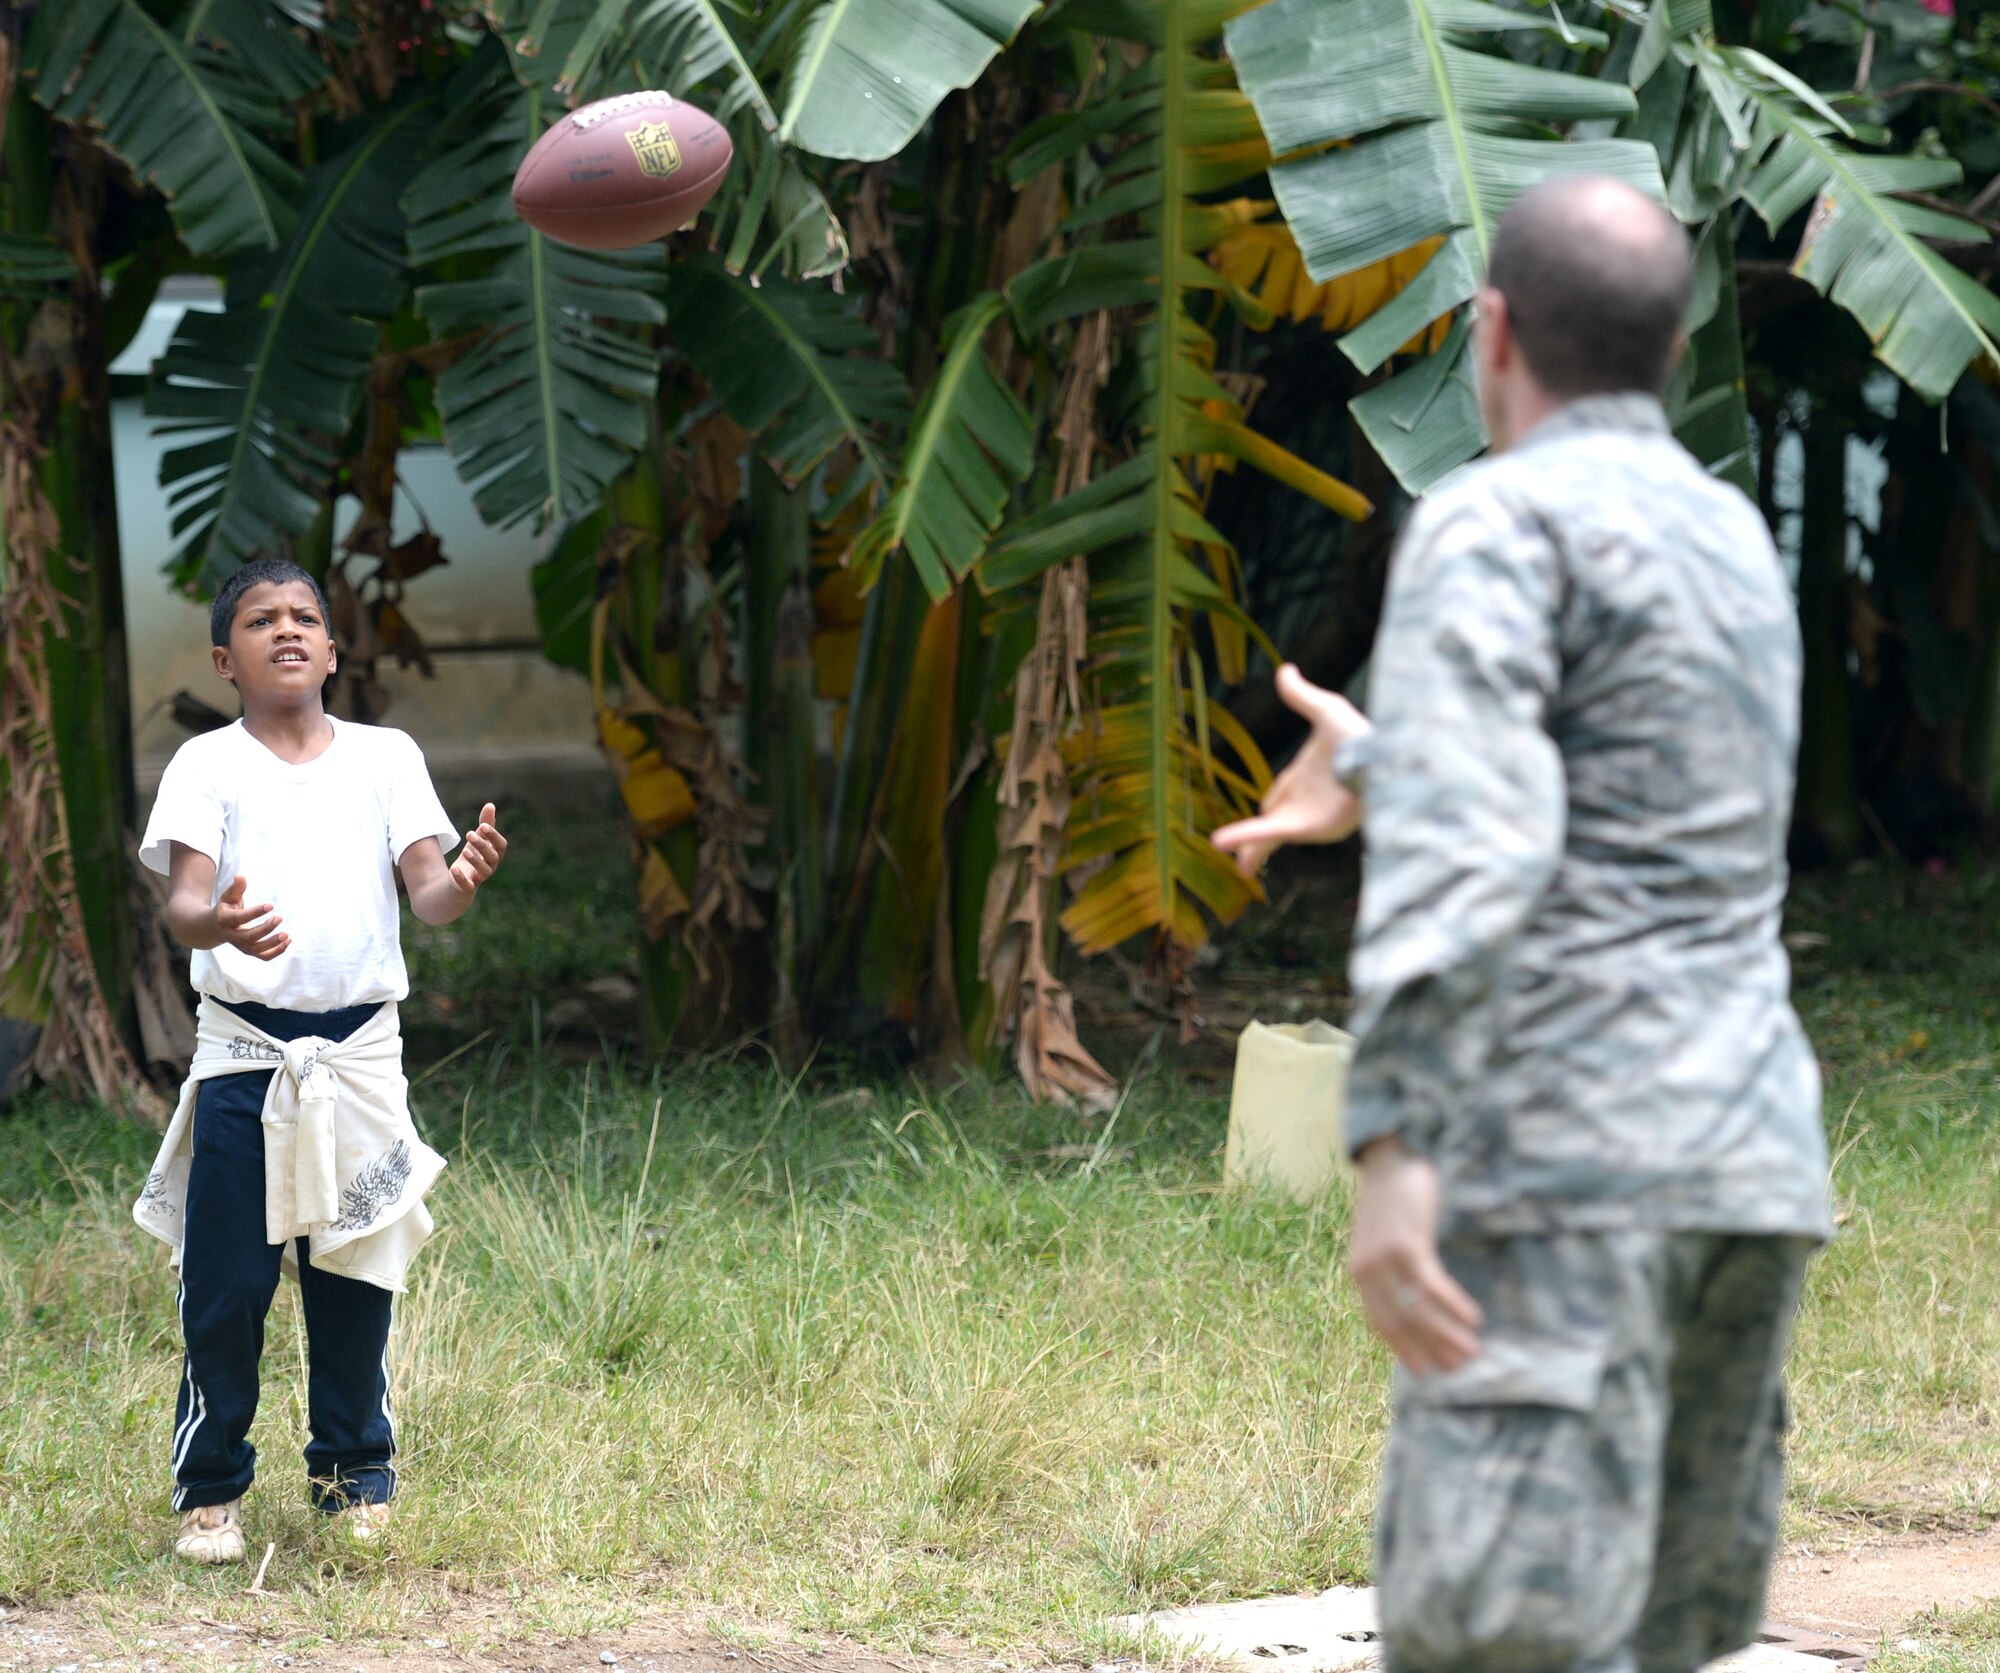 U.S. Maj. Norman Zellers, 60th Medical Operations Squadron, 60th Medical Group physician assistant, out of Travis Air Force Base, Calif., and Allentown, Pa., tosses a football to Lucas Arellano Paz, 13, during the Guardians of the Fatherland event at Puerto Castillo Naval Base in Trujillo, Honduras, June 6, 2015. More than 20 NEW HORIZONS Honduras 2015 personnel volunteered to participate in the event. NEW HORIZONS was launched in the 1980s and is an annual joint humanitarian assistance exercise that U.S. Southern Command conducts with a partner nation in Central America, South America or the Caribbean. The exercise improves joint training readiness of U.S. and partner nation civil engineers, medical professionals and support personnel through humanitarian assistance activities. (U.S. Air Force photo by Capt. David J. Murphy/Released)